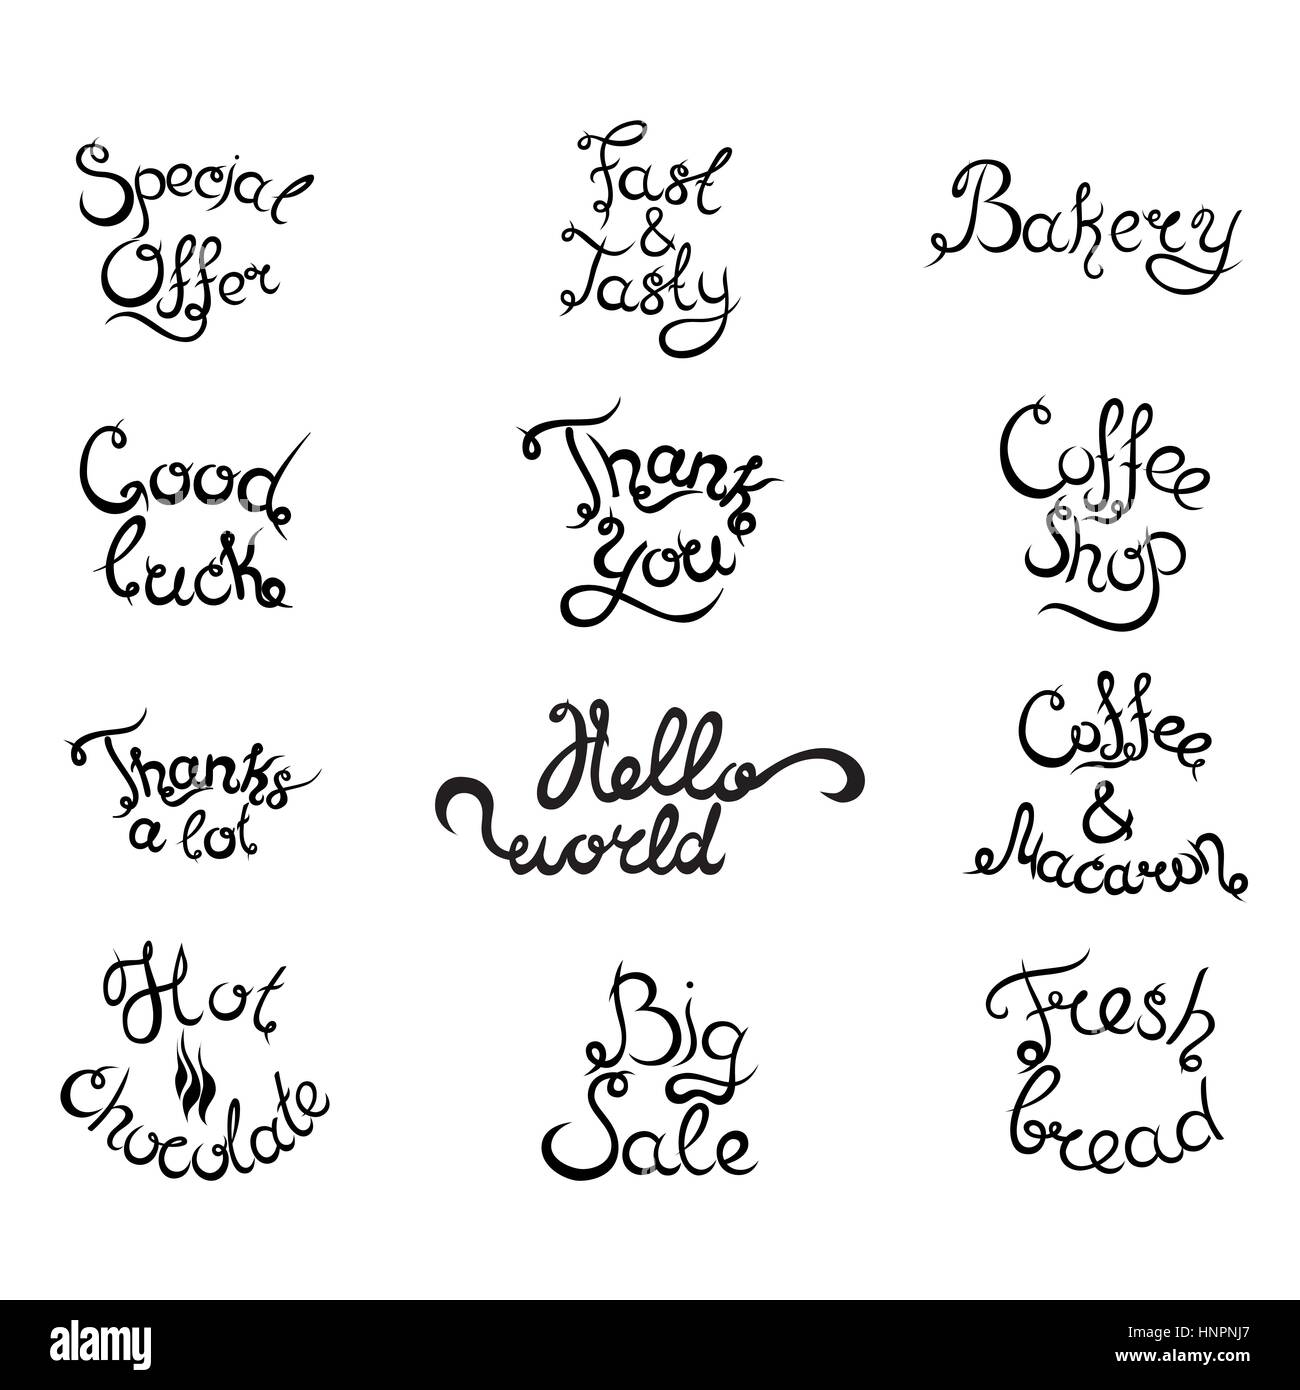 Set 4 of curly hand-drawn lettering Phrases for Coffee Shop. Espresso Cappuccino Cakes Donuts Macarons Cookies Biscuits Latte Macchiatto Cup of Coffee Stock Vector